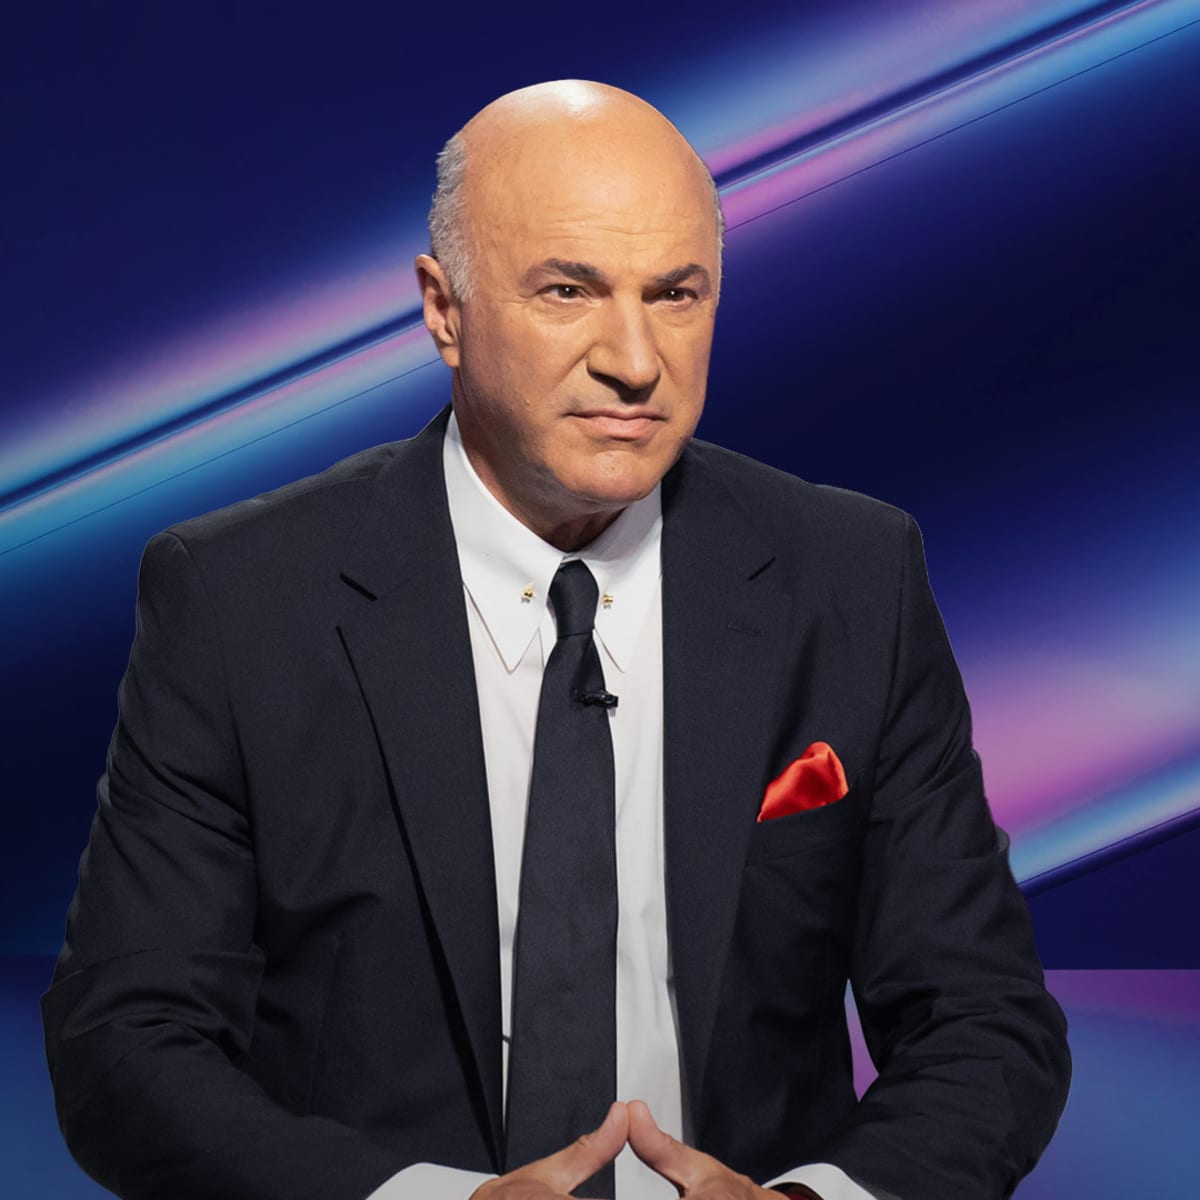 Kevin O'Leary – The Daily Routine of Mr Wonderful